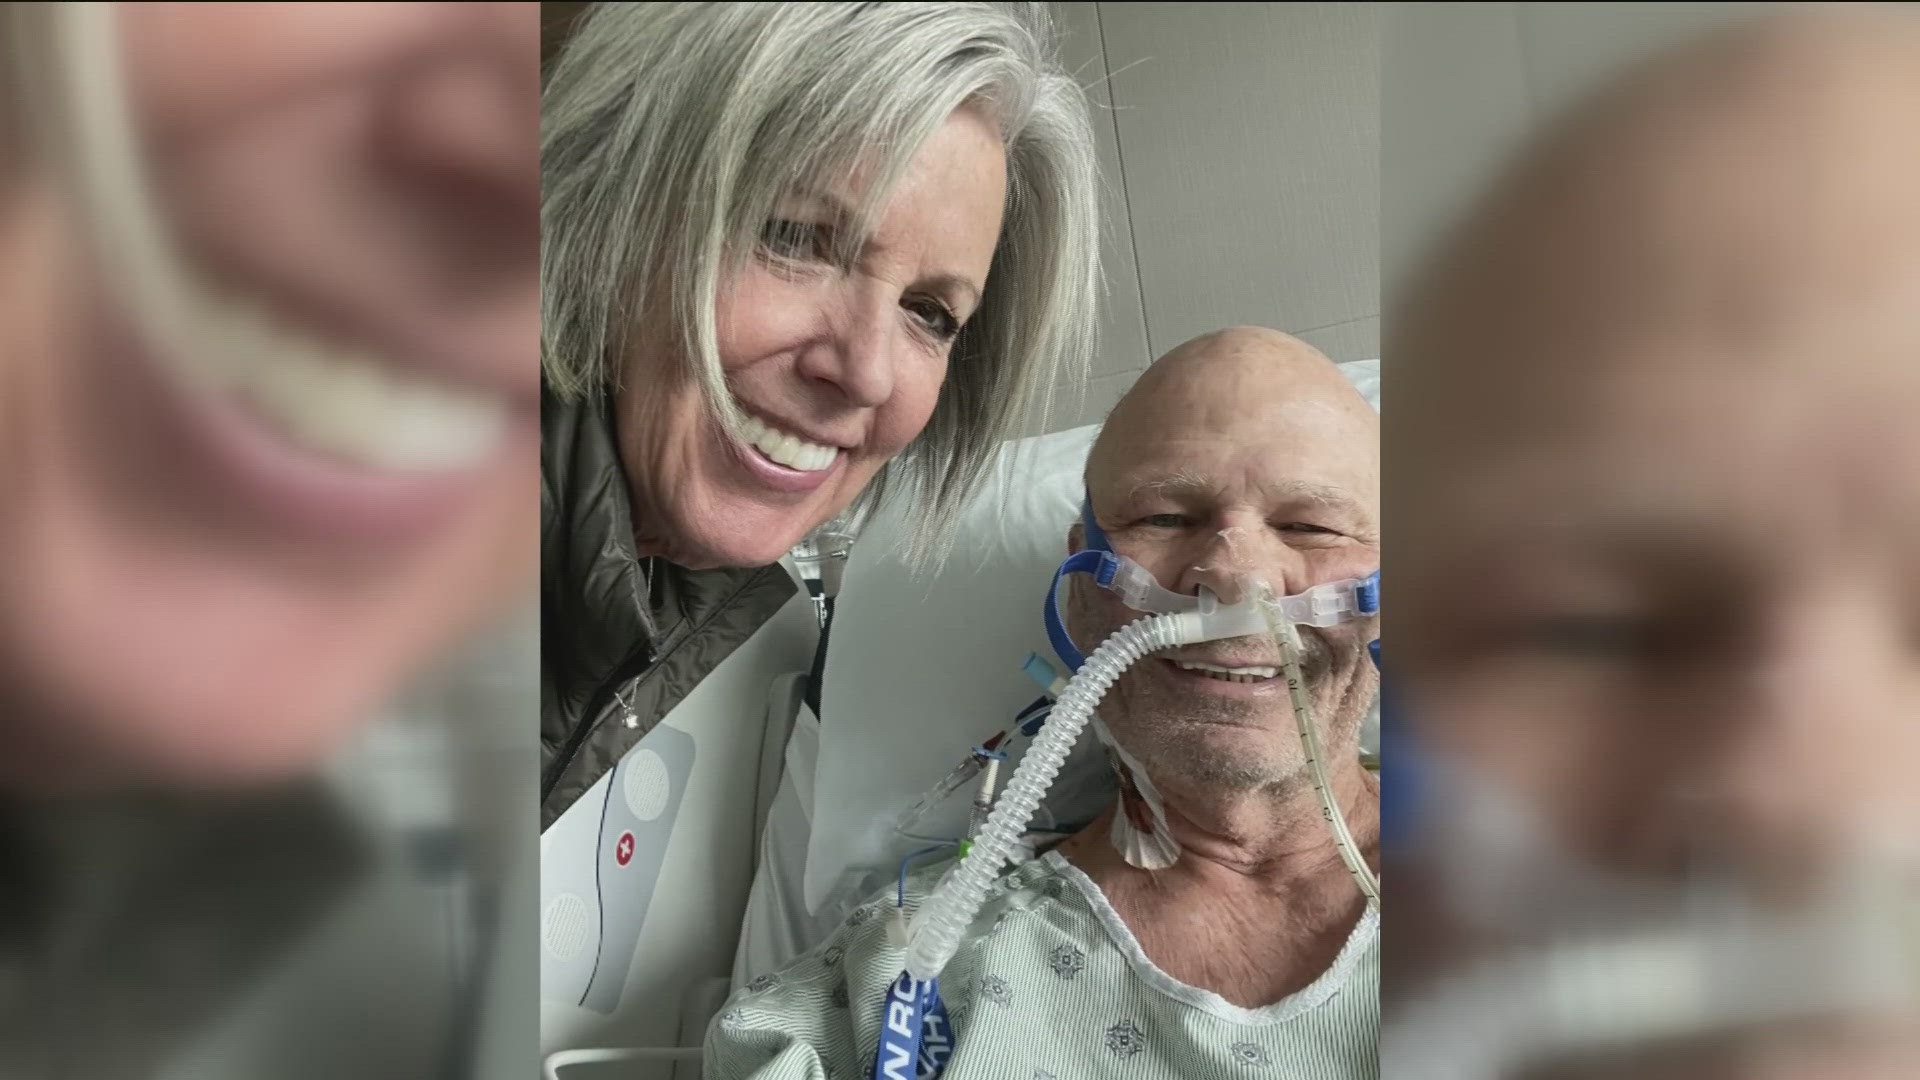 Barry Rhodes, 73, suffered a ruptured abdominal aortic aneurysm. But he didn't know that until doctors at ProMedica Toledo Hospital saw the signs and saved his life.